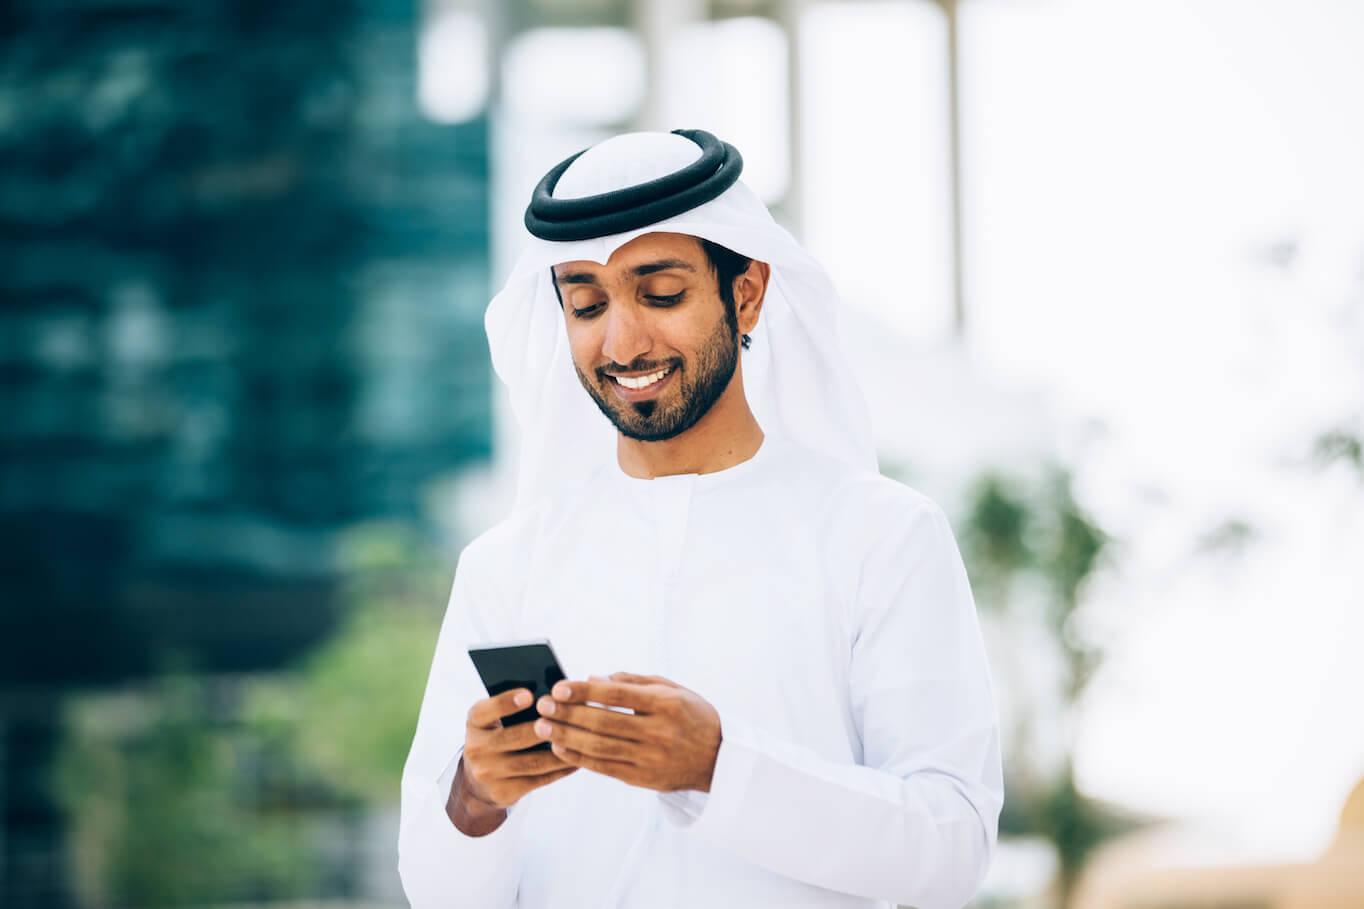 Man in white holding smartphone